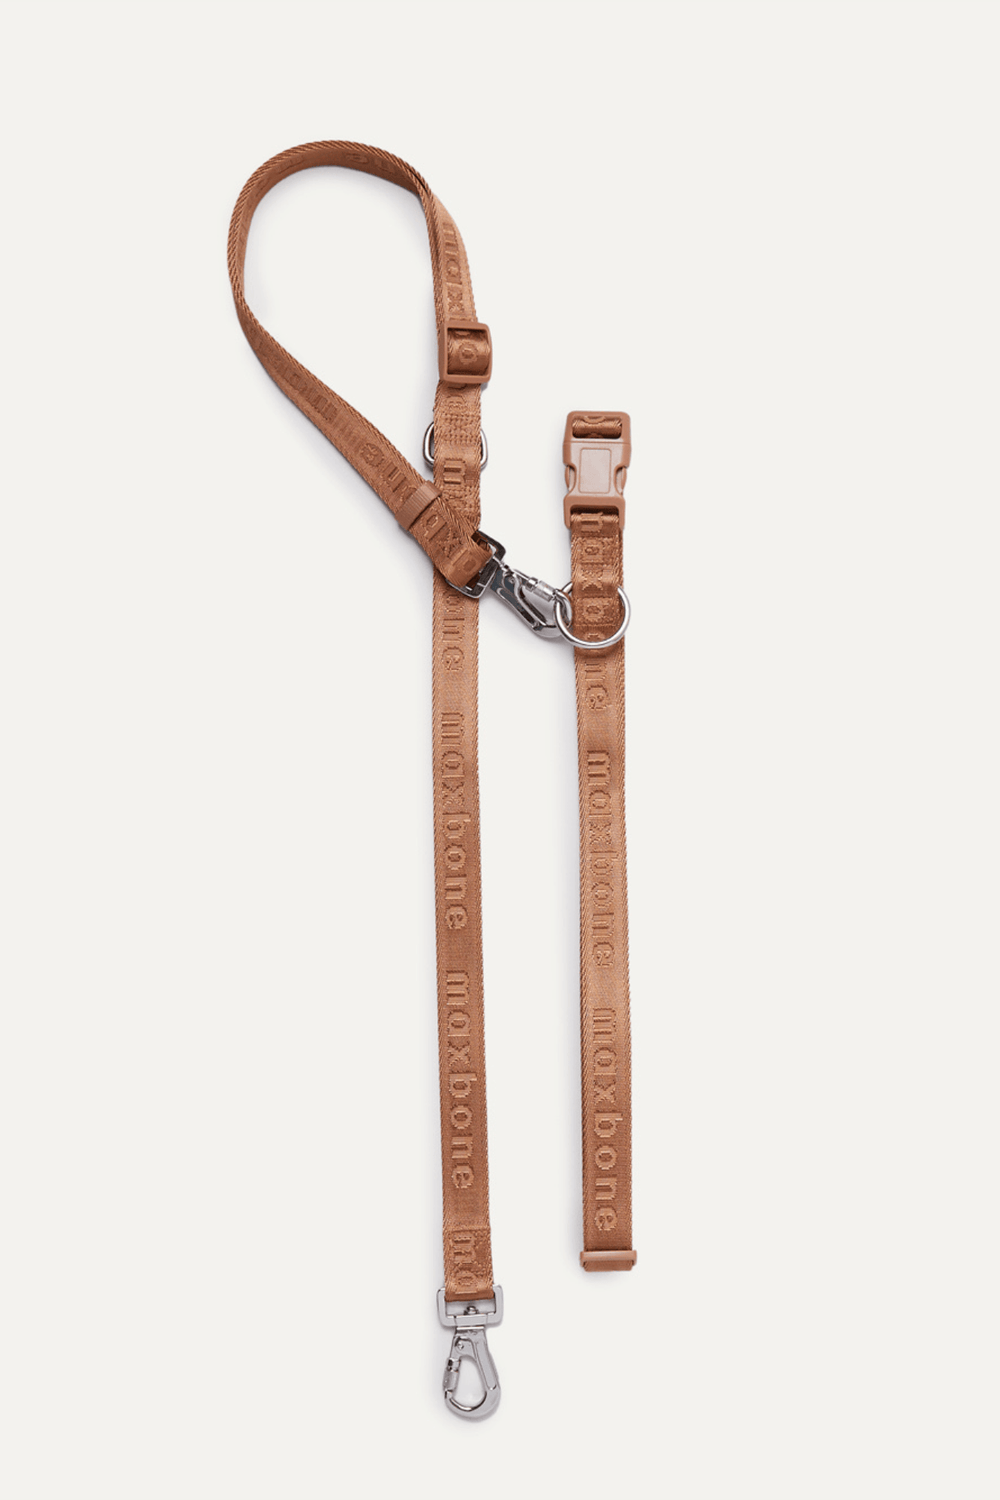 Free Louis Vuitton LV Dog Harness Leash For Tiny Dogs, Pet